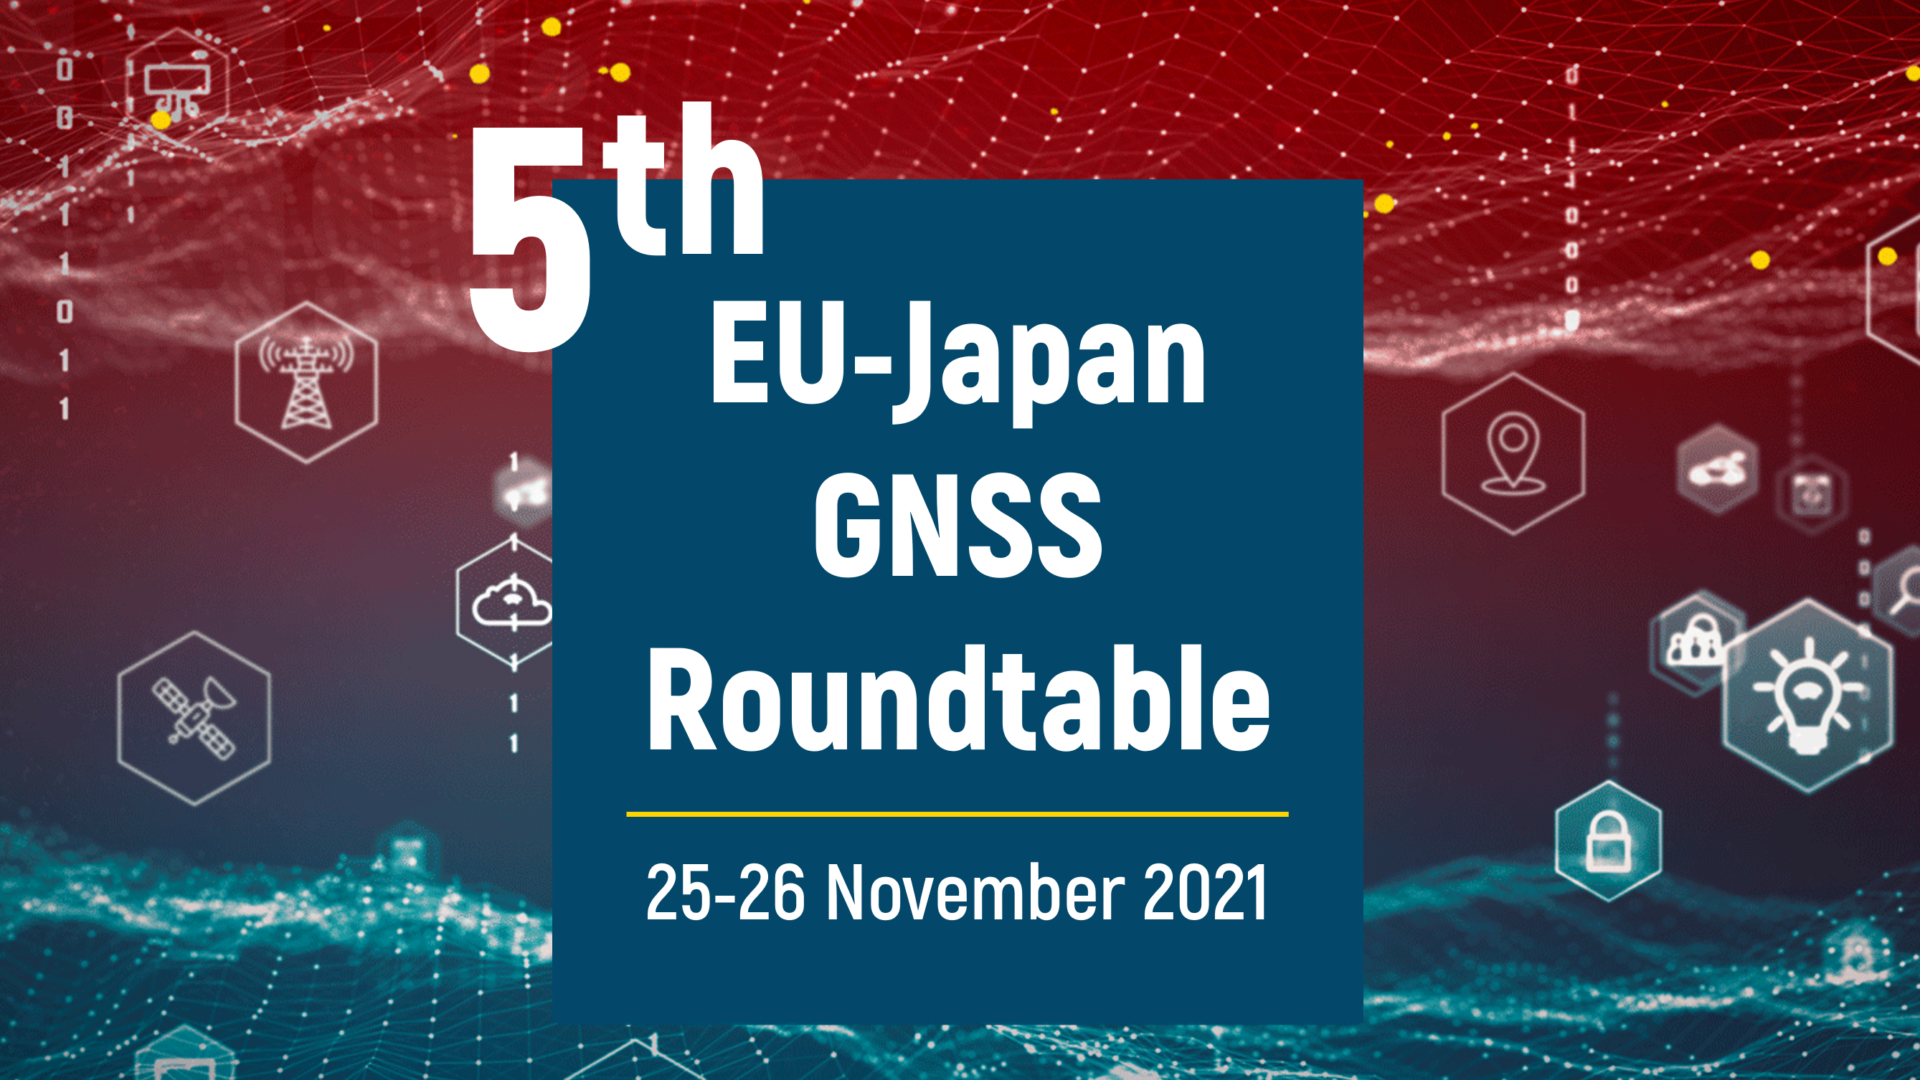 The 5th EU-Japan GNSS Roundtable is taking place on 25-26 November